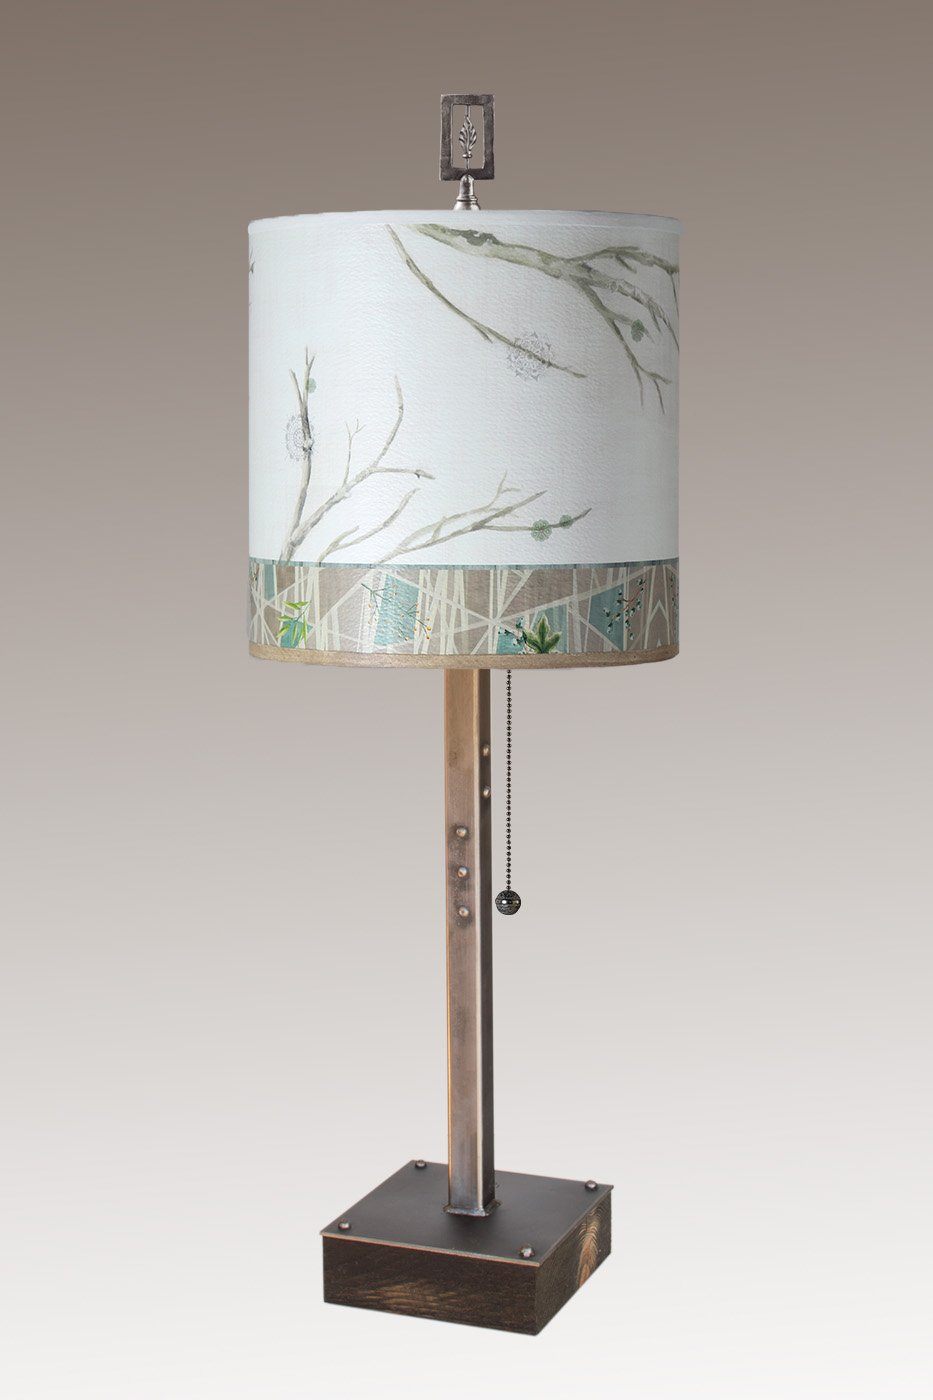 Steel Table Lamp on Wood with Medium Drum Shade in Prism Branch